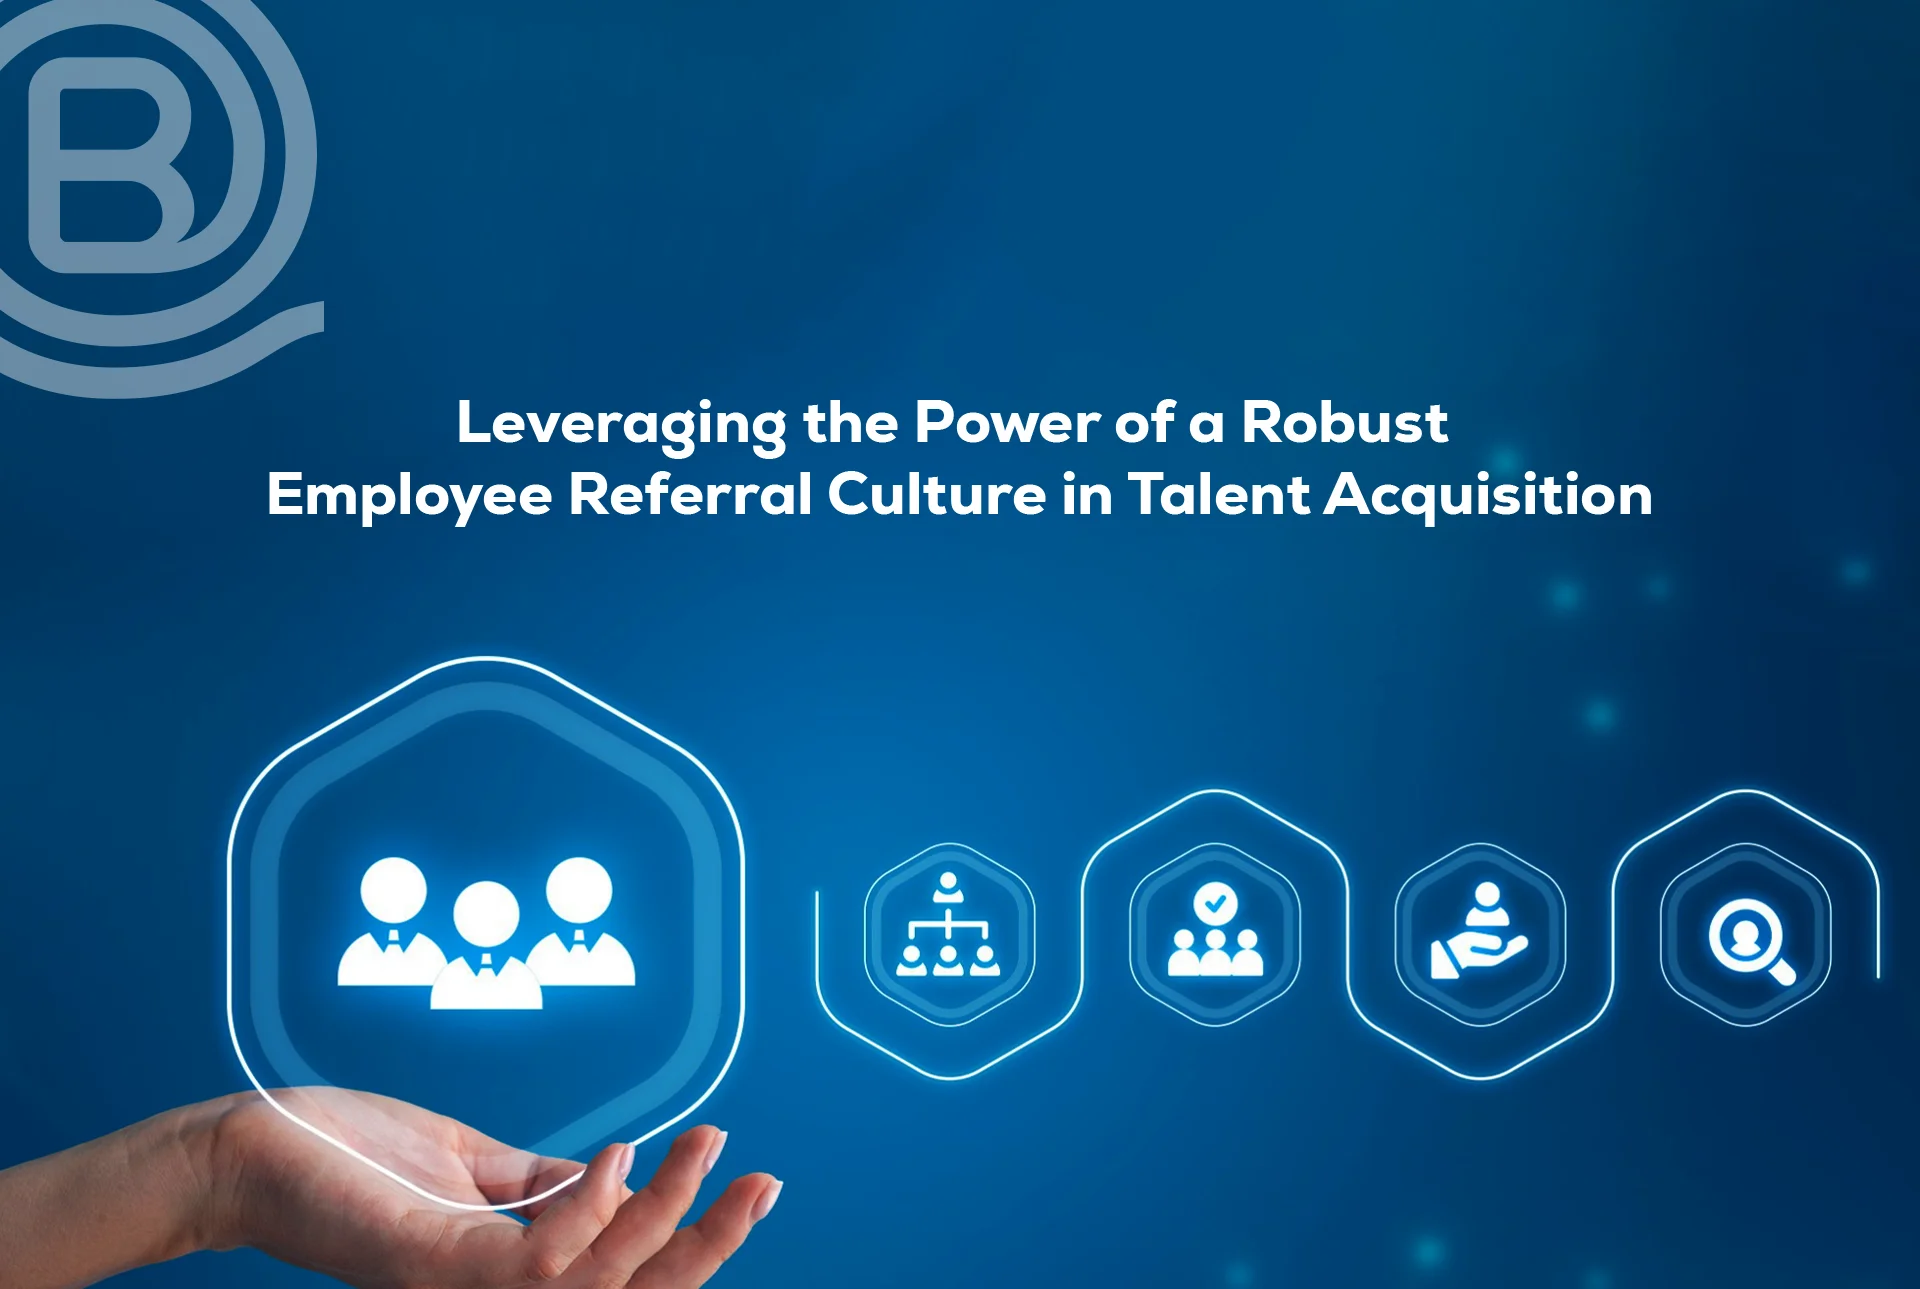 Leveraging the Power of a Robust Employee Referral Culture in Talent Acquisition